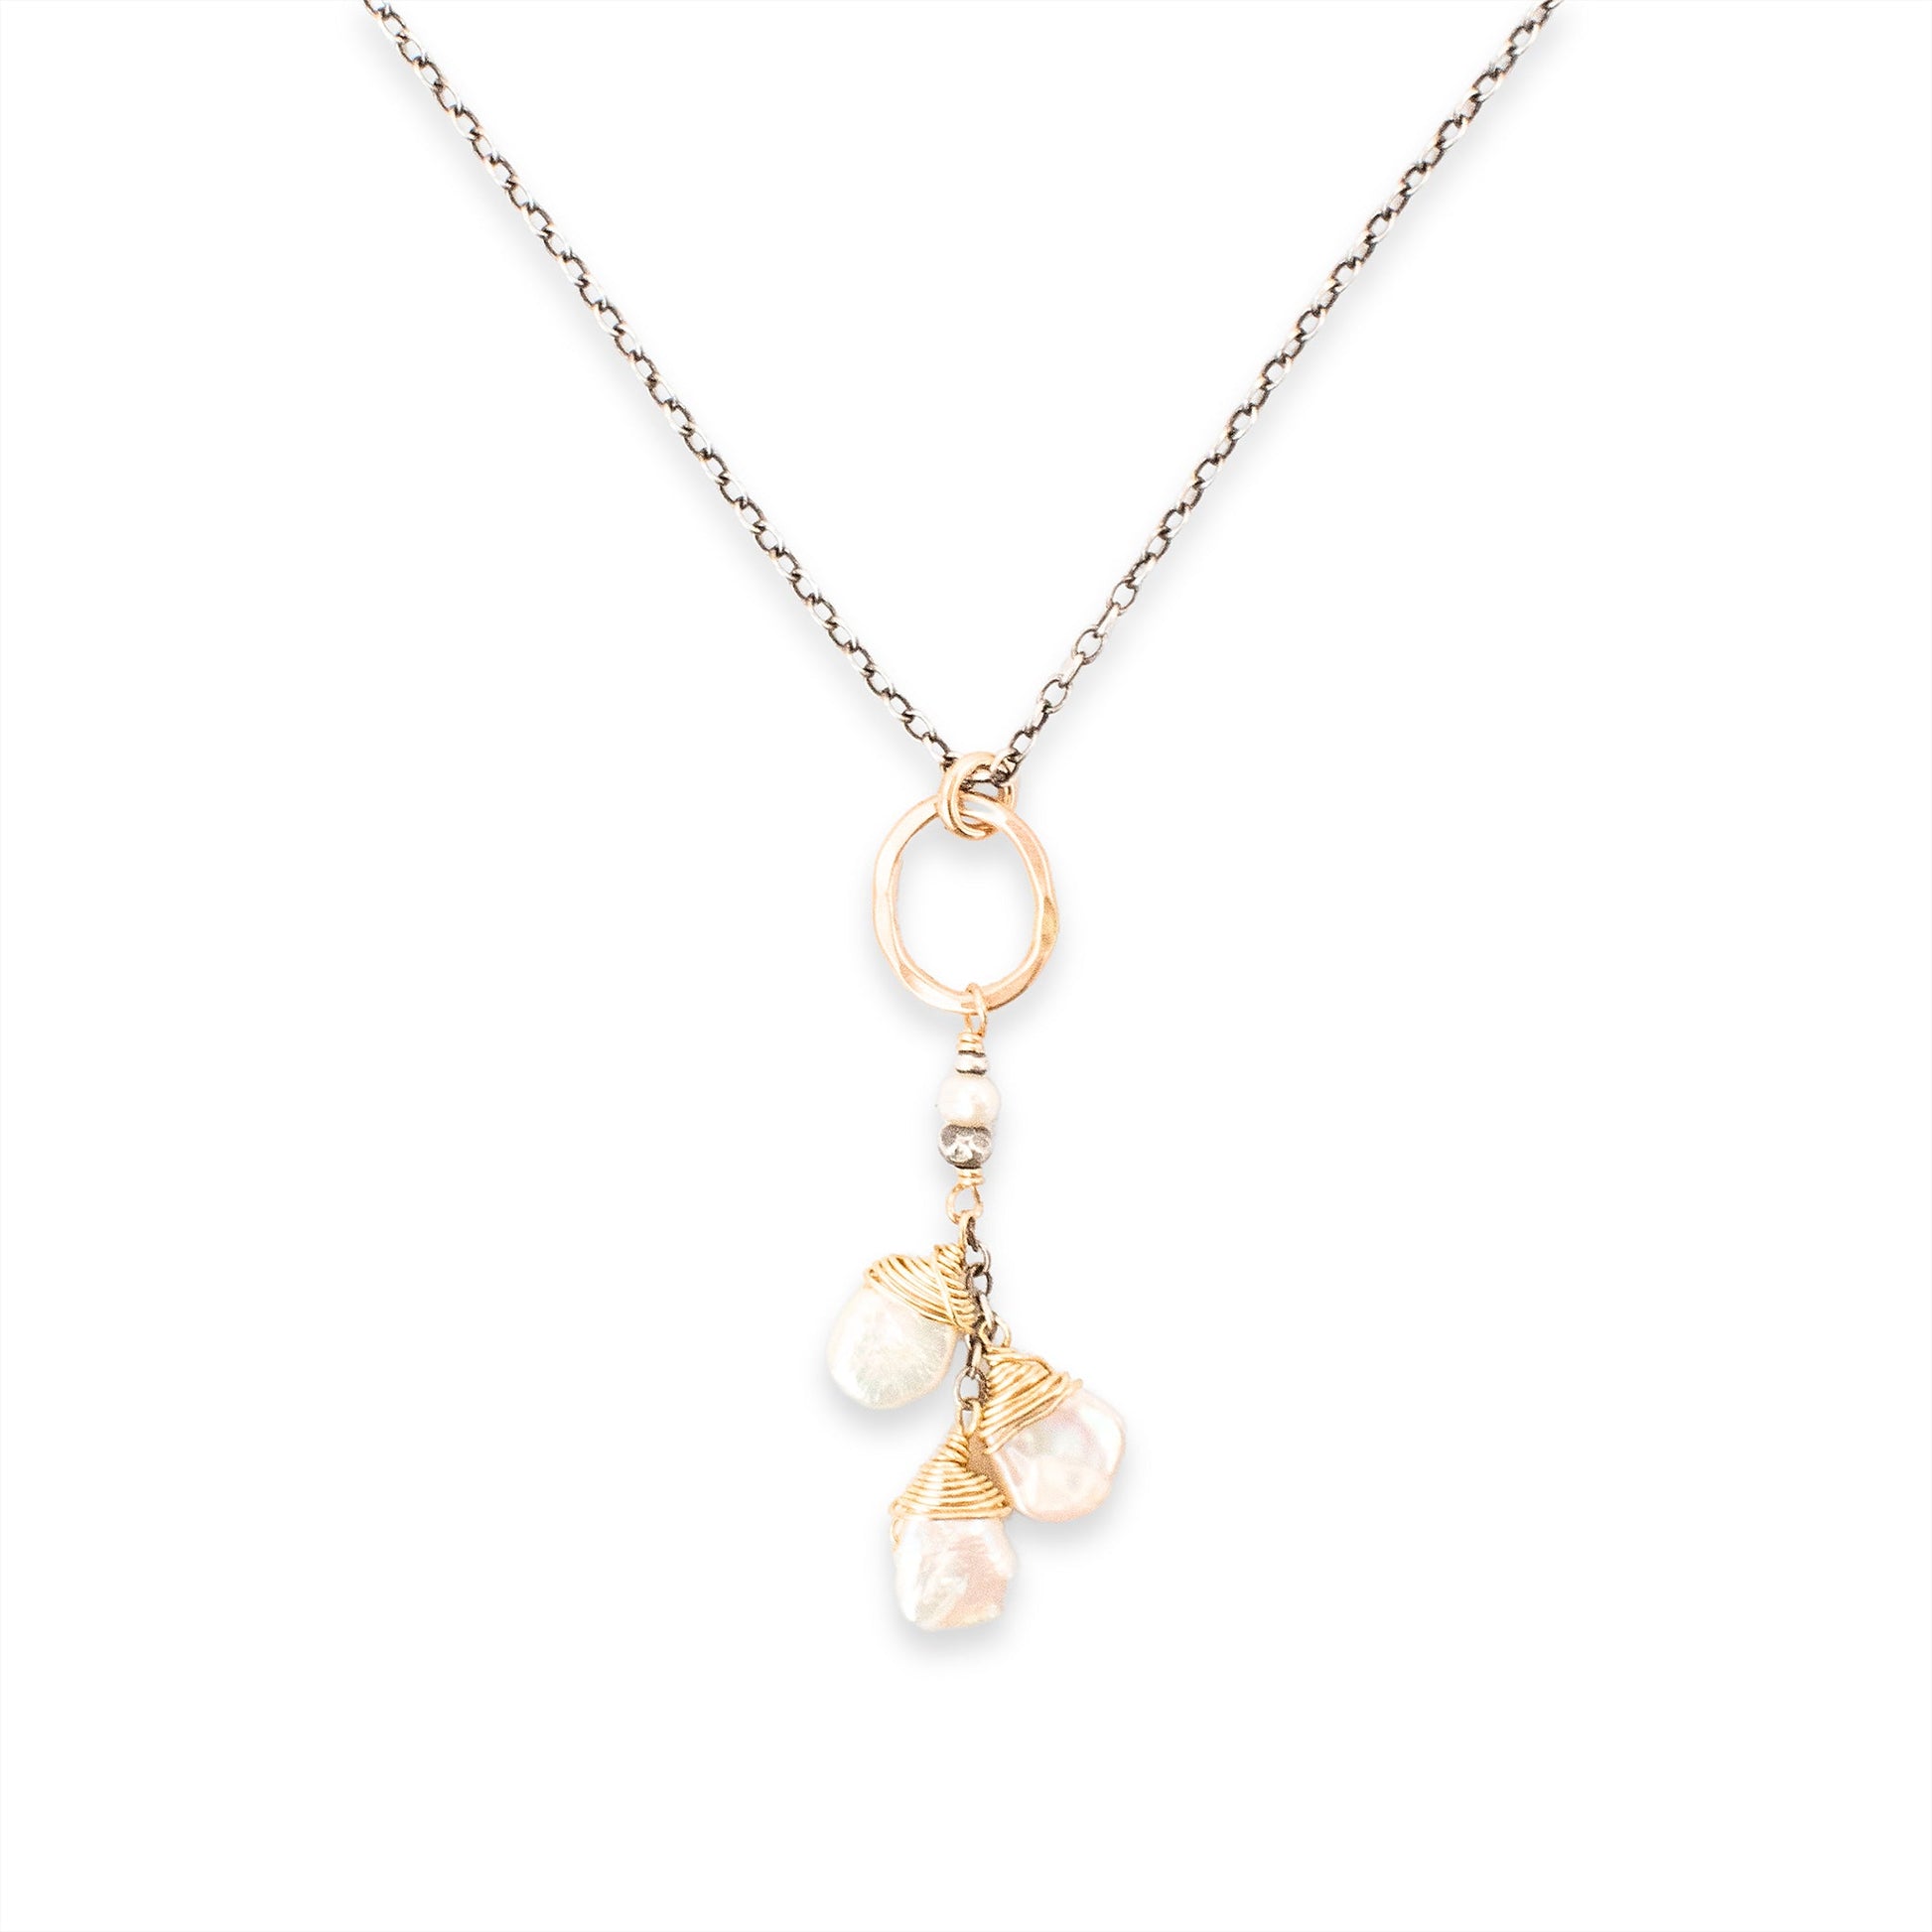 Gilded Pearl Wrap Necklace - Necklaces